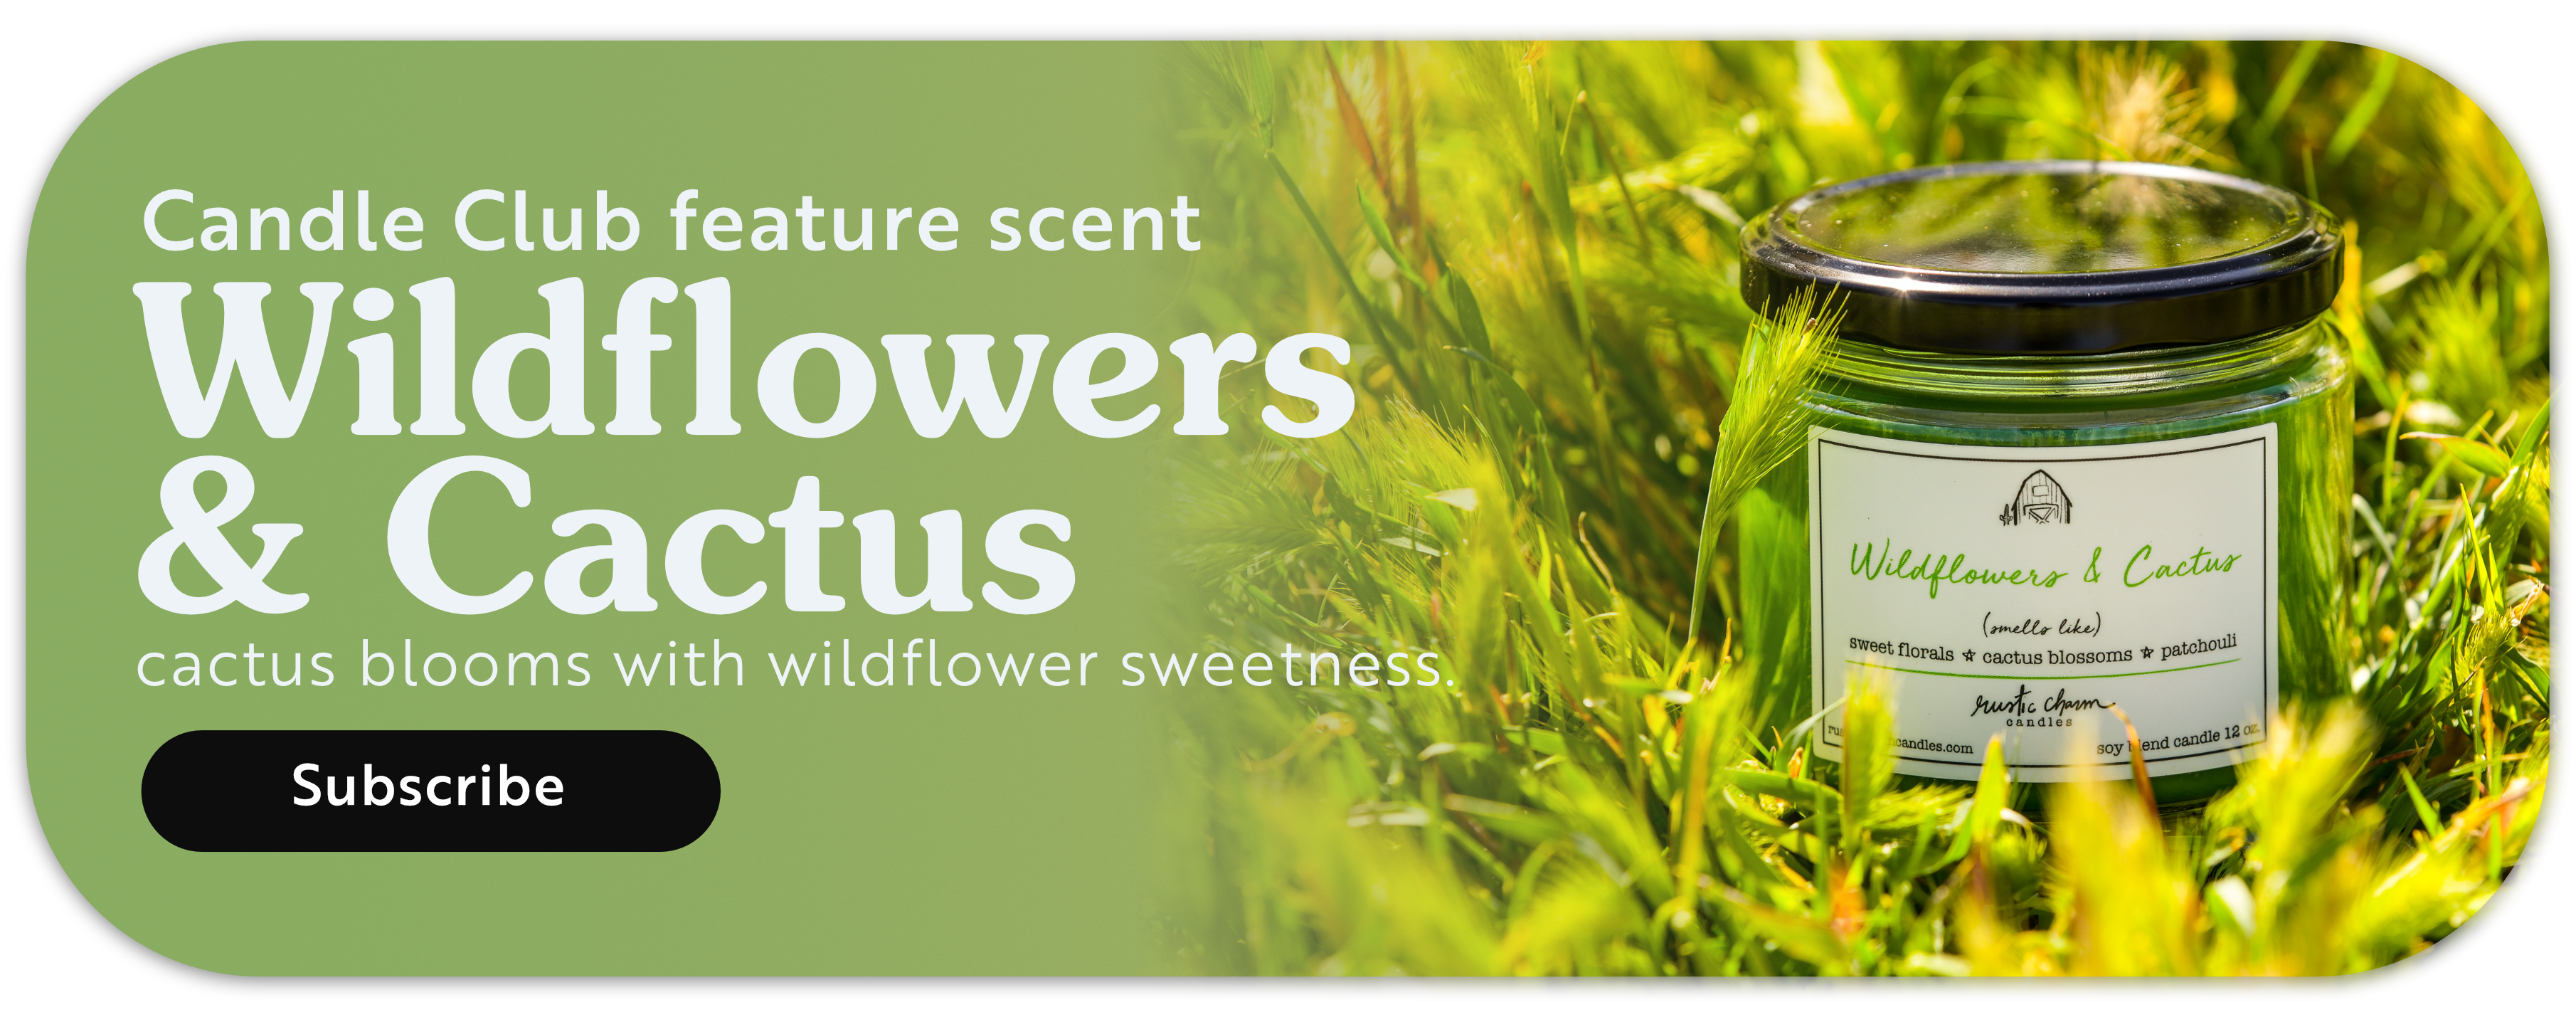 Wildflowers & Cactus featured scent